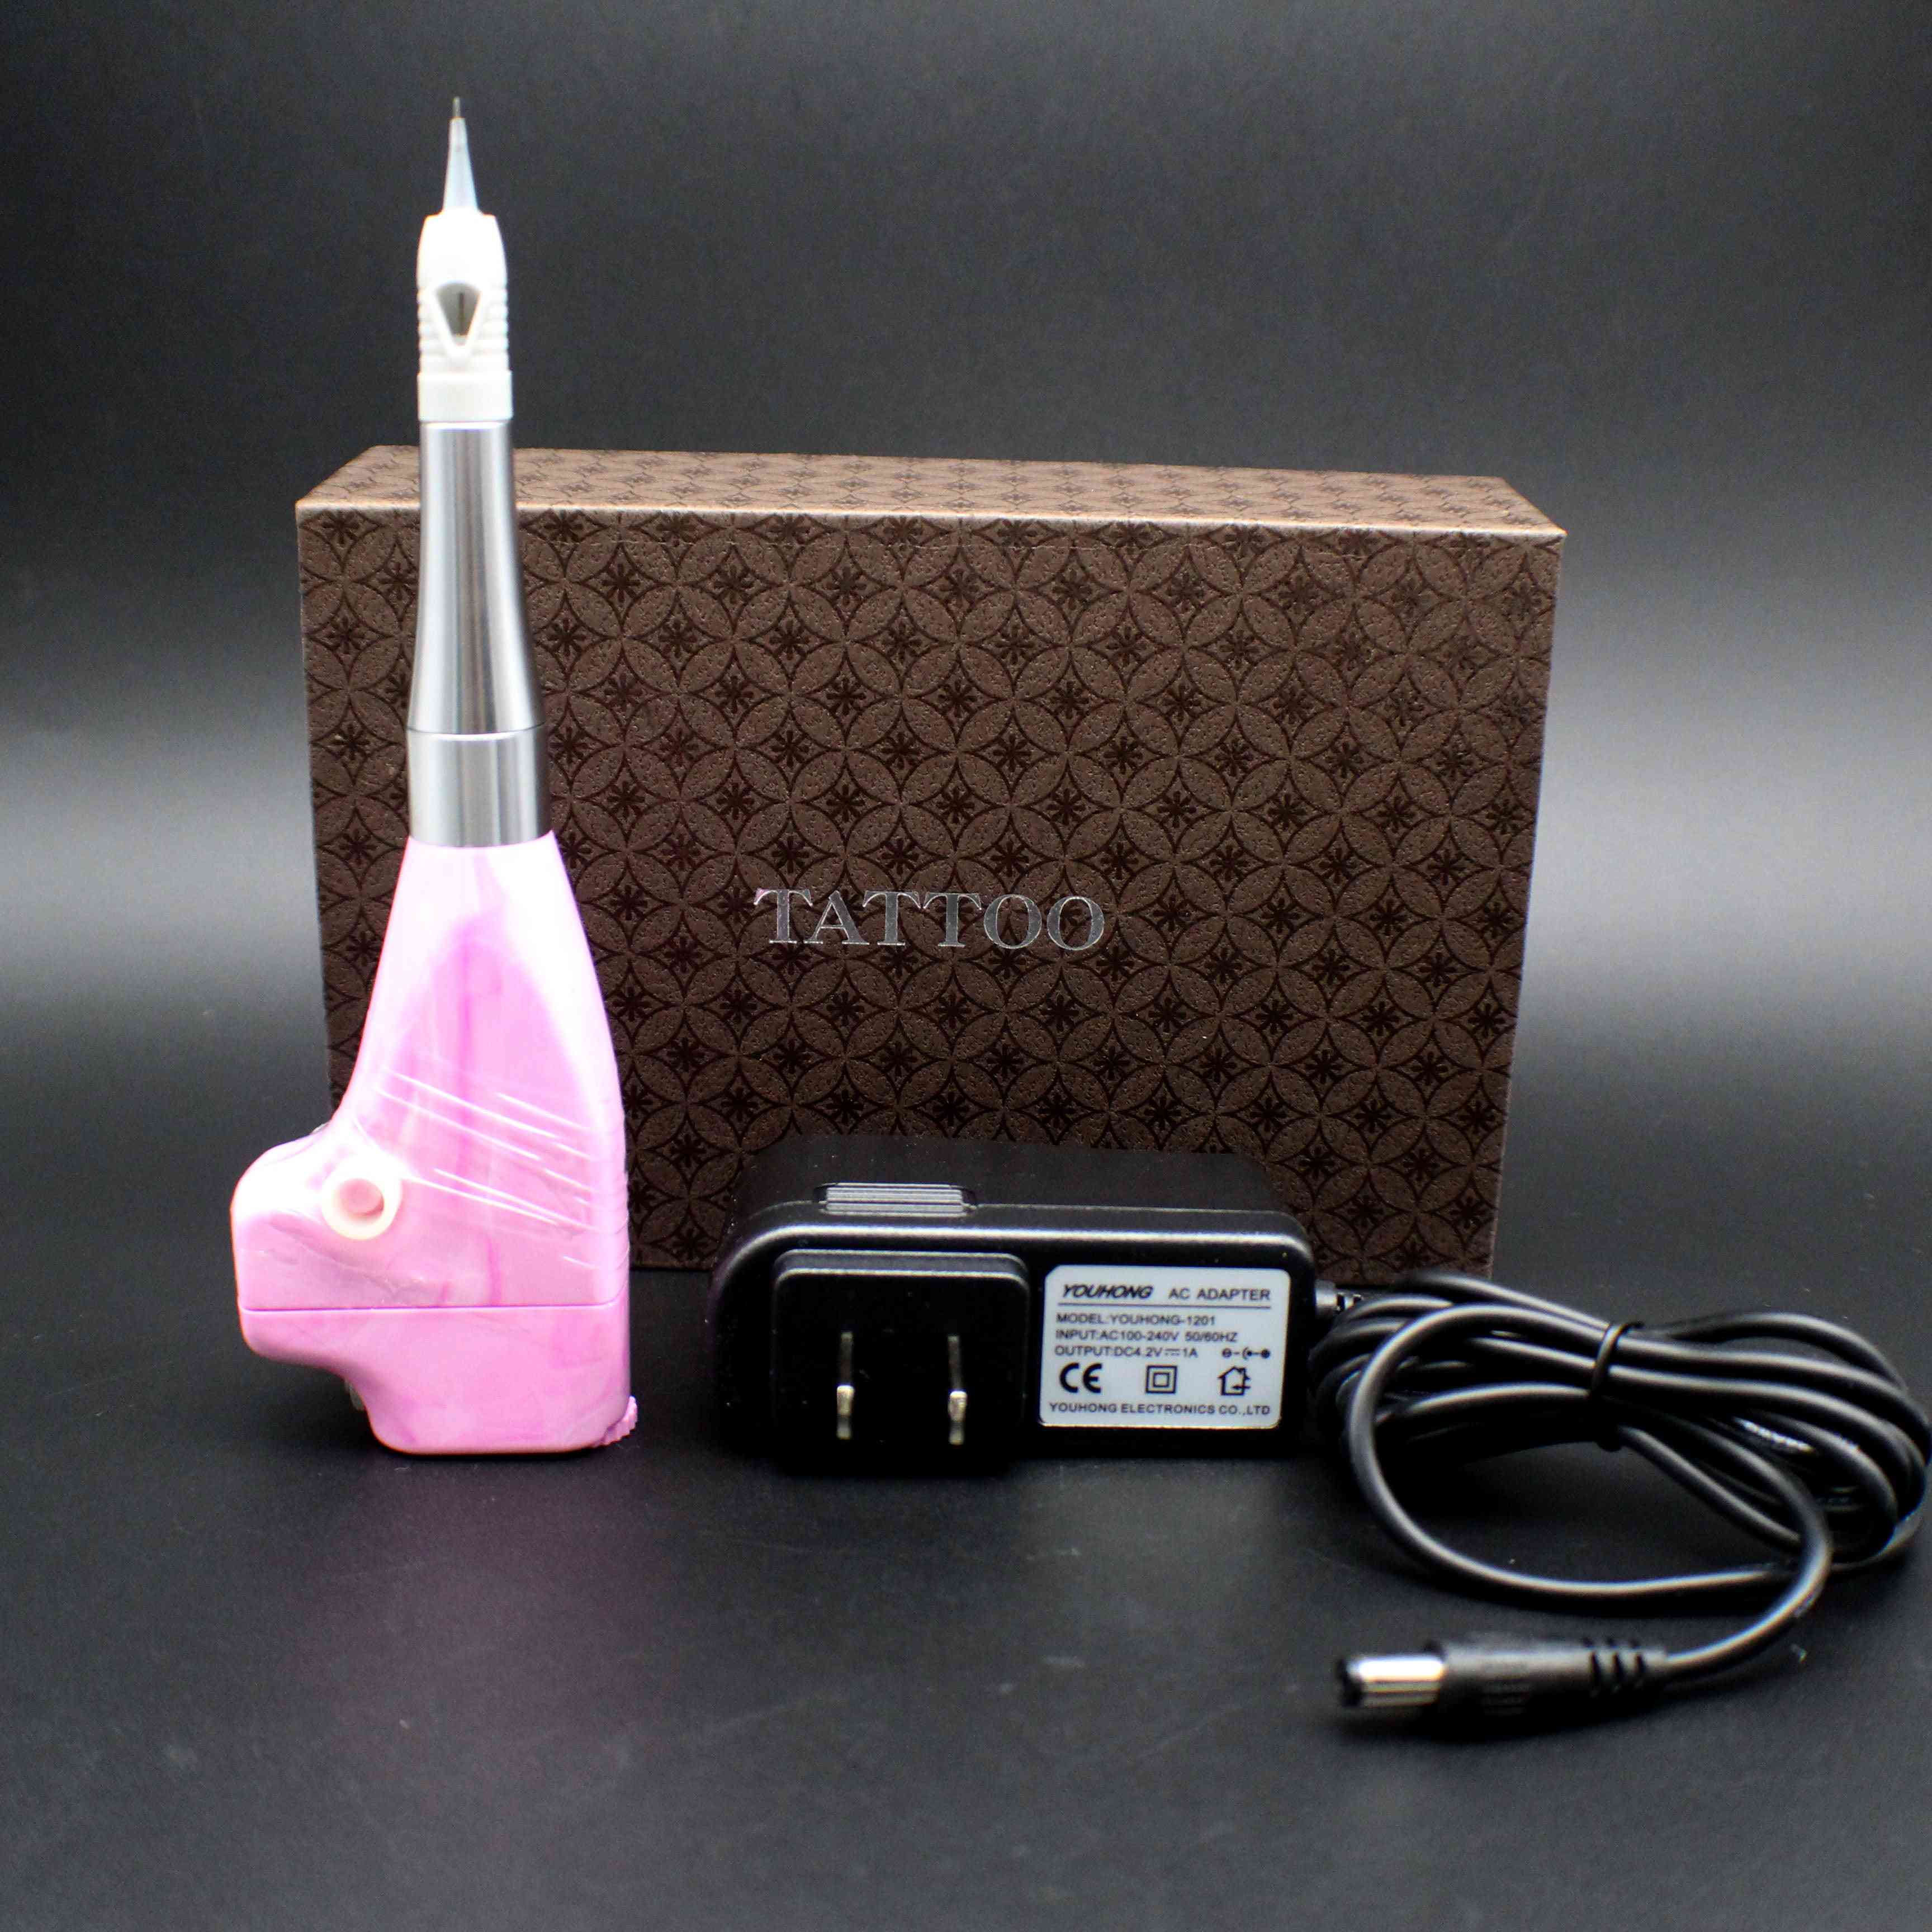 Permanent Makeup Tattoo Machine Wireless Using Pen Set For Eyebrow , Lips Shading With Cartridge Needles